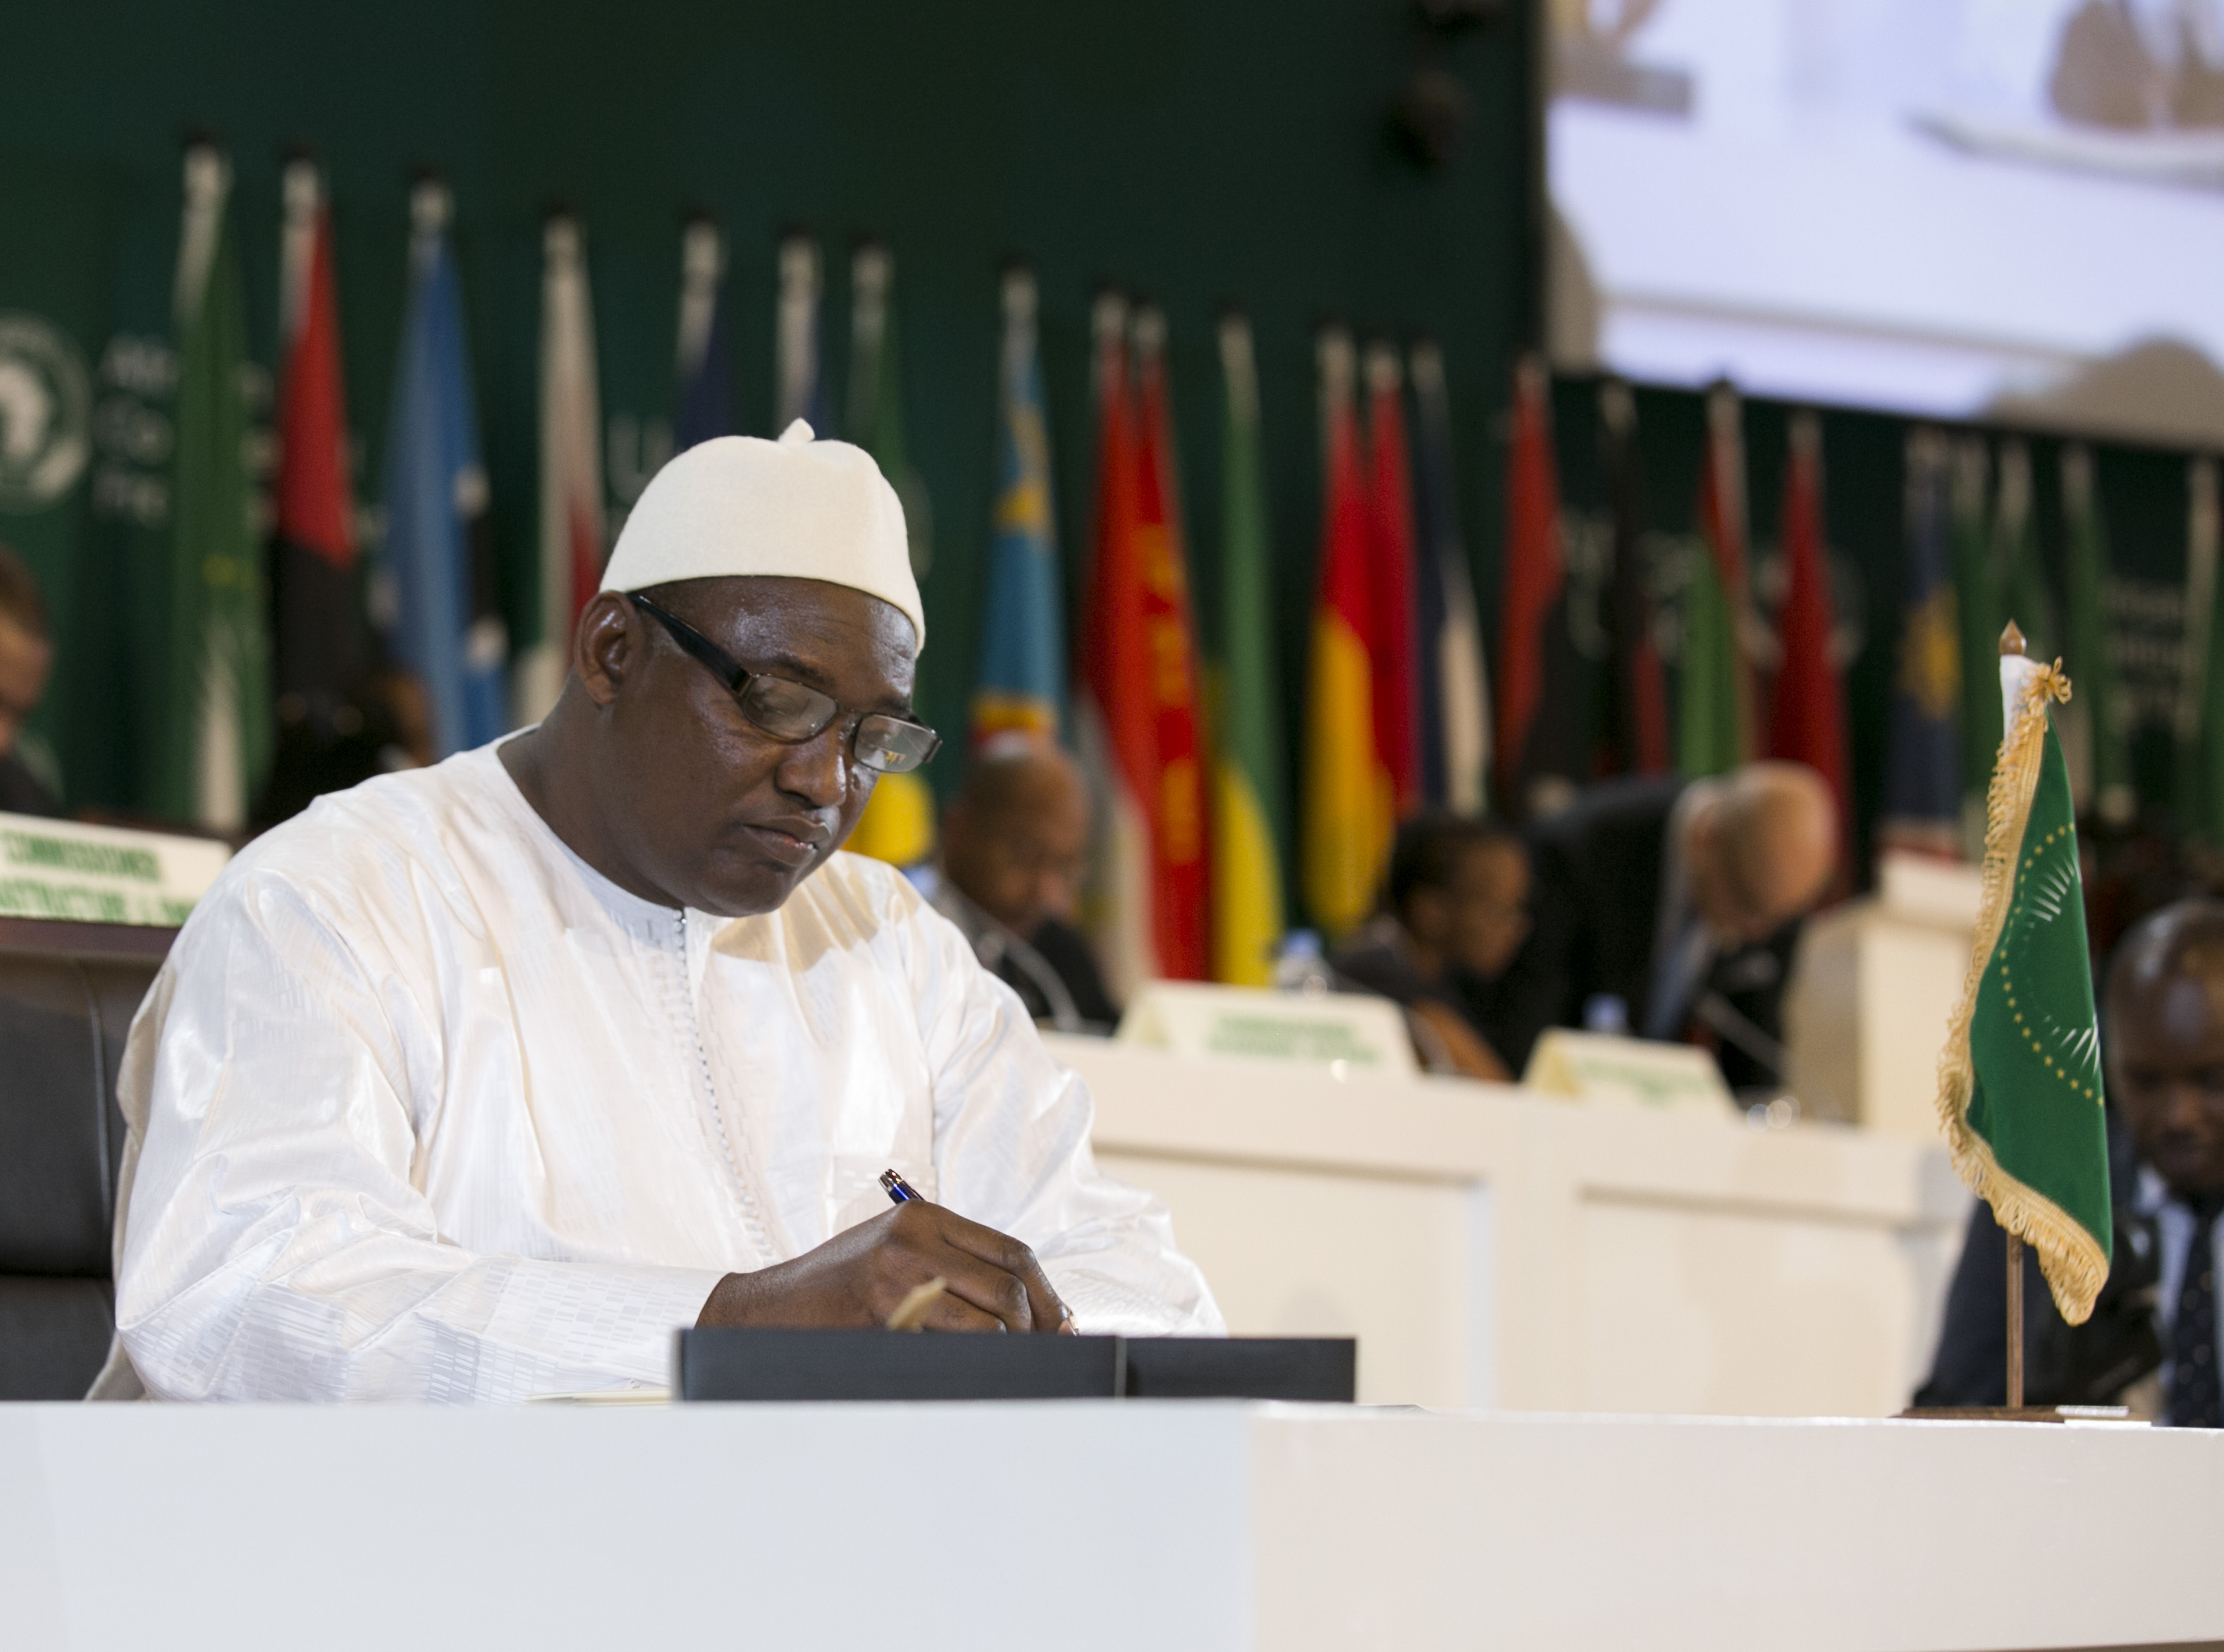 President Adama Barrow of the Gambia (photo credit: Paul Kagame/flickr)